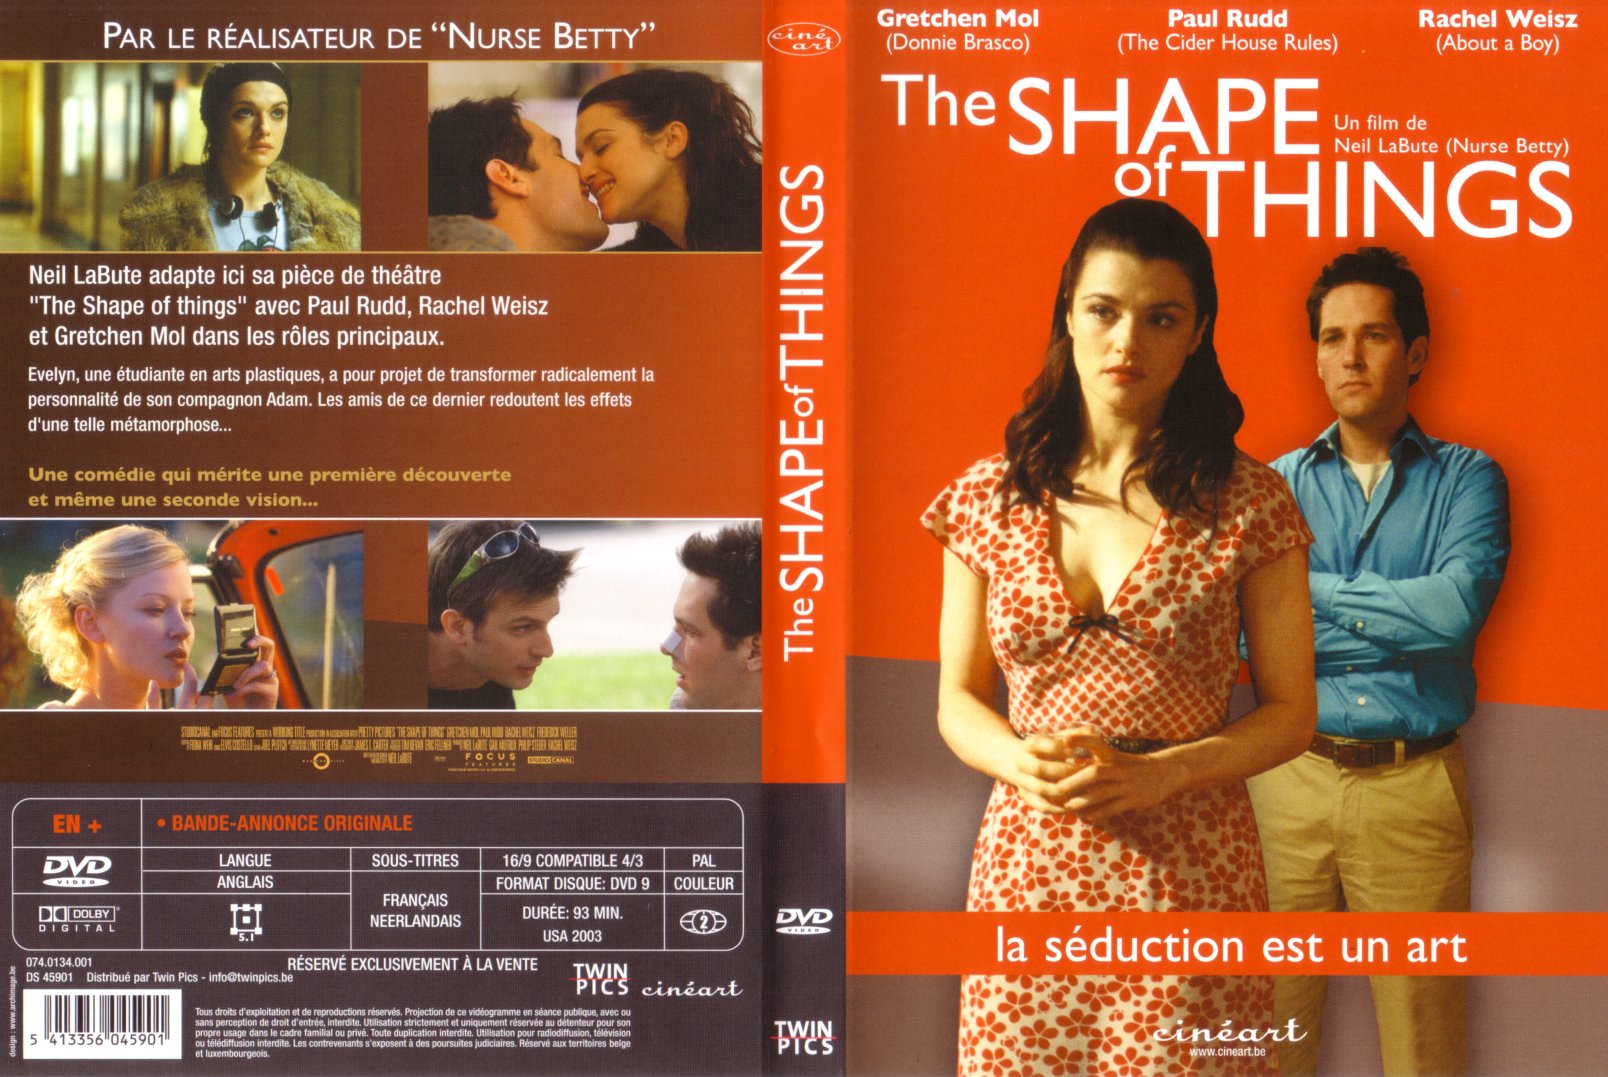 Jaquette DVD The shape of things